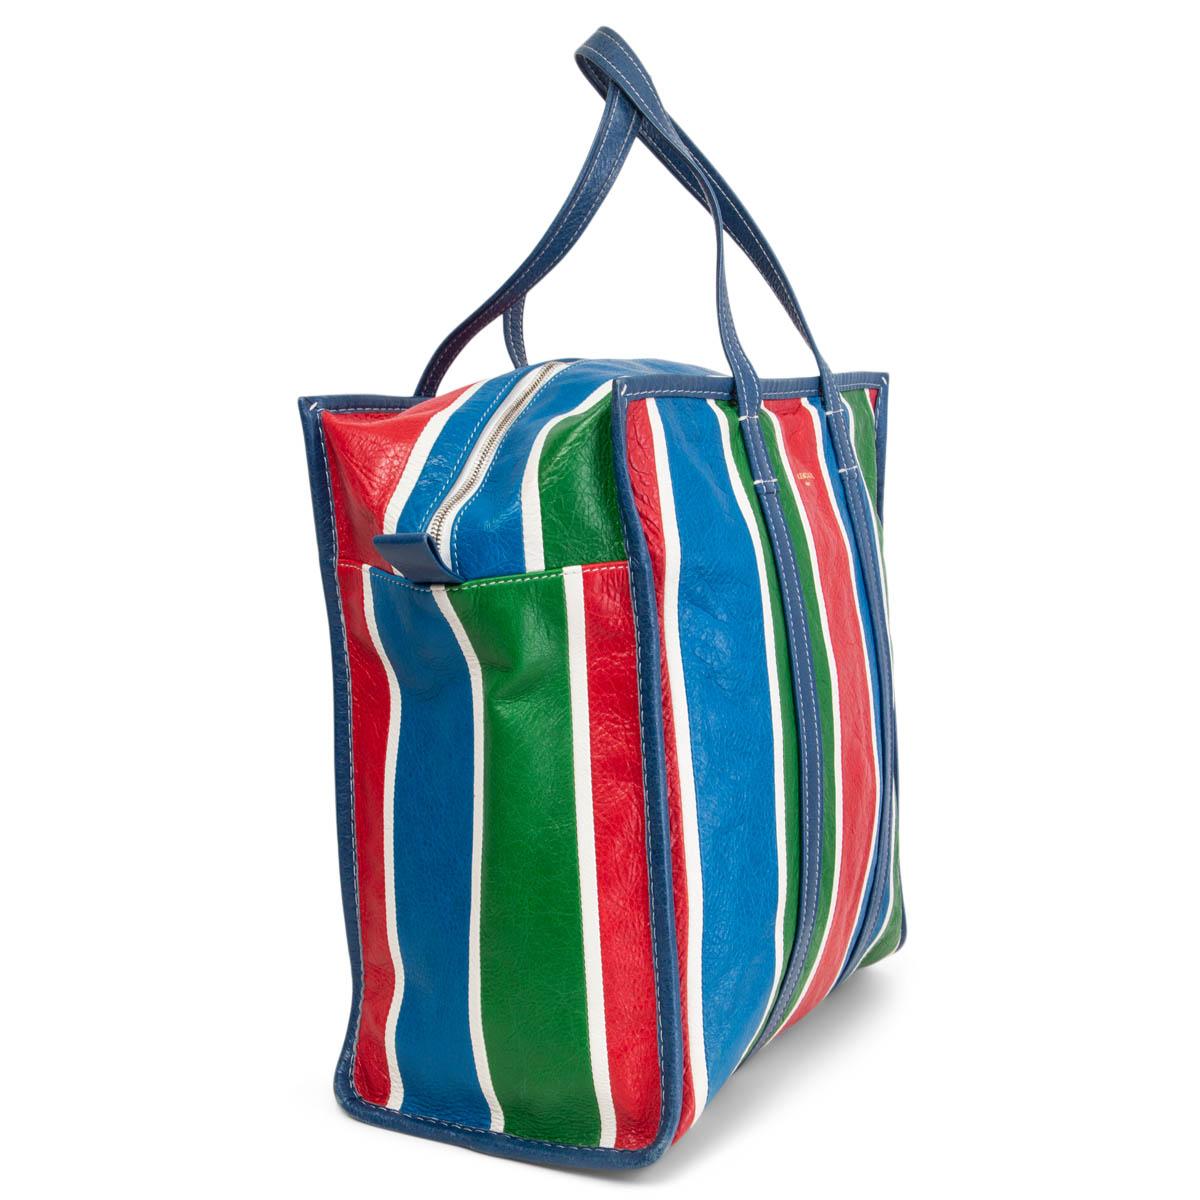 100% authentic Balenciaga Large Bazar shopping bag striped in red, blue, green and white wrinkled lambskin. Opens with a zipper on top and is lined in black canvas with a zipper pocket against the back and an open pocket against the front.  Has been